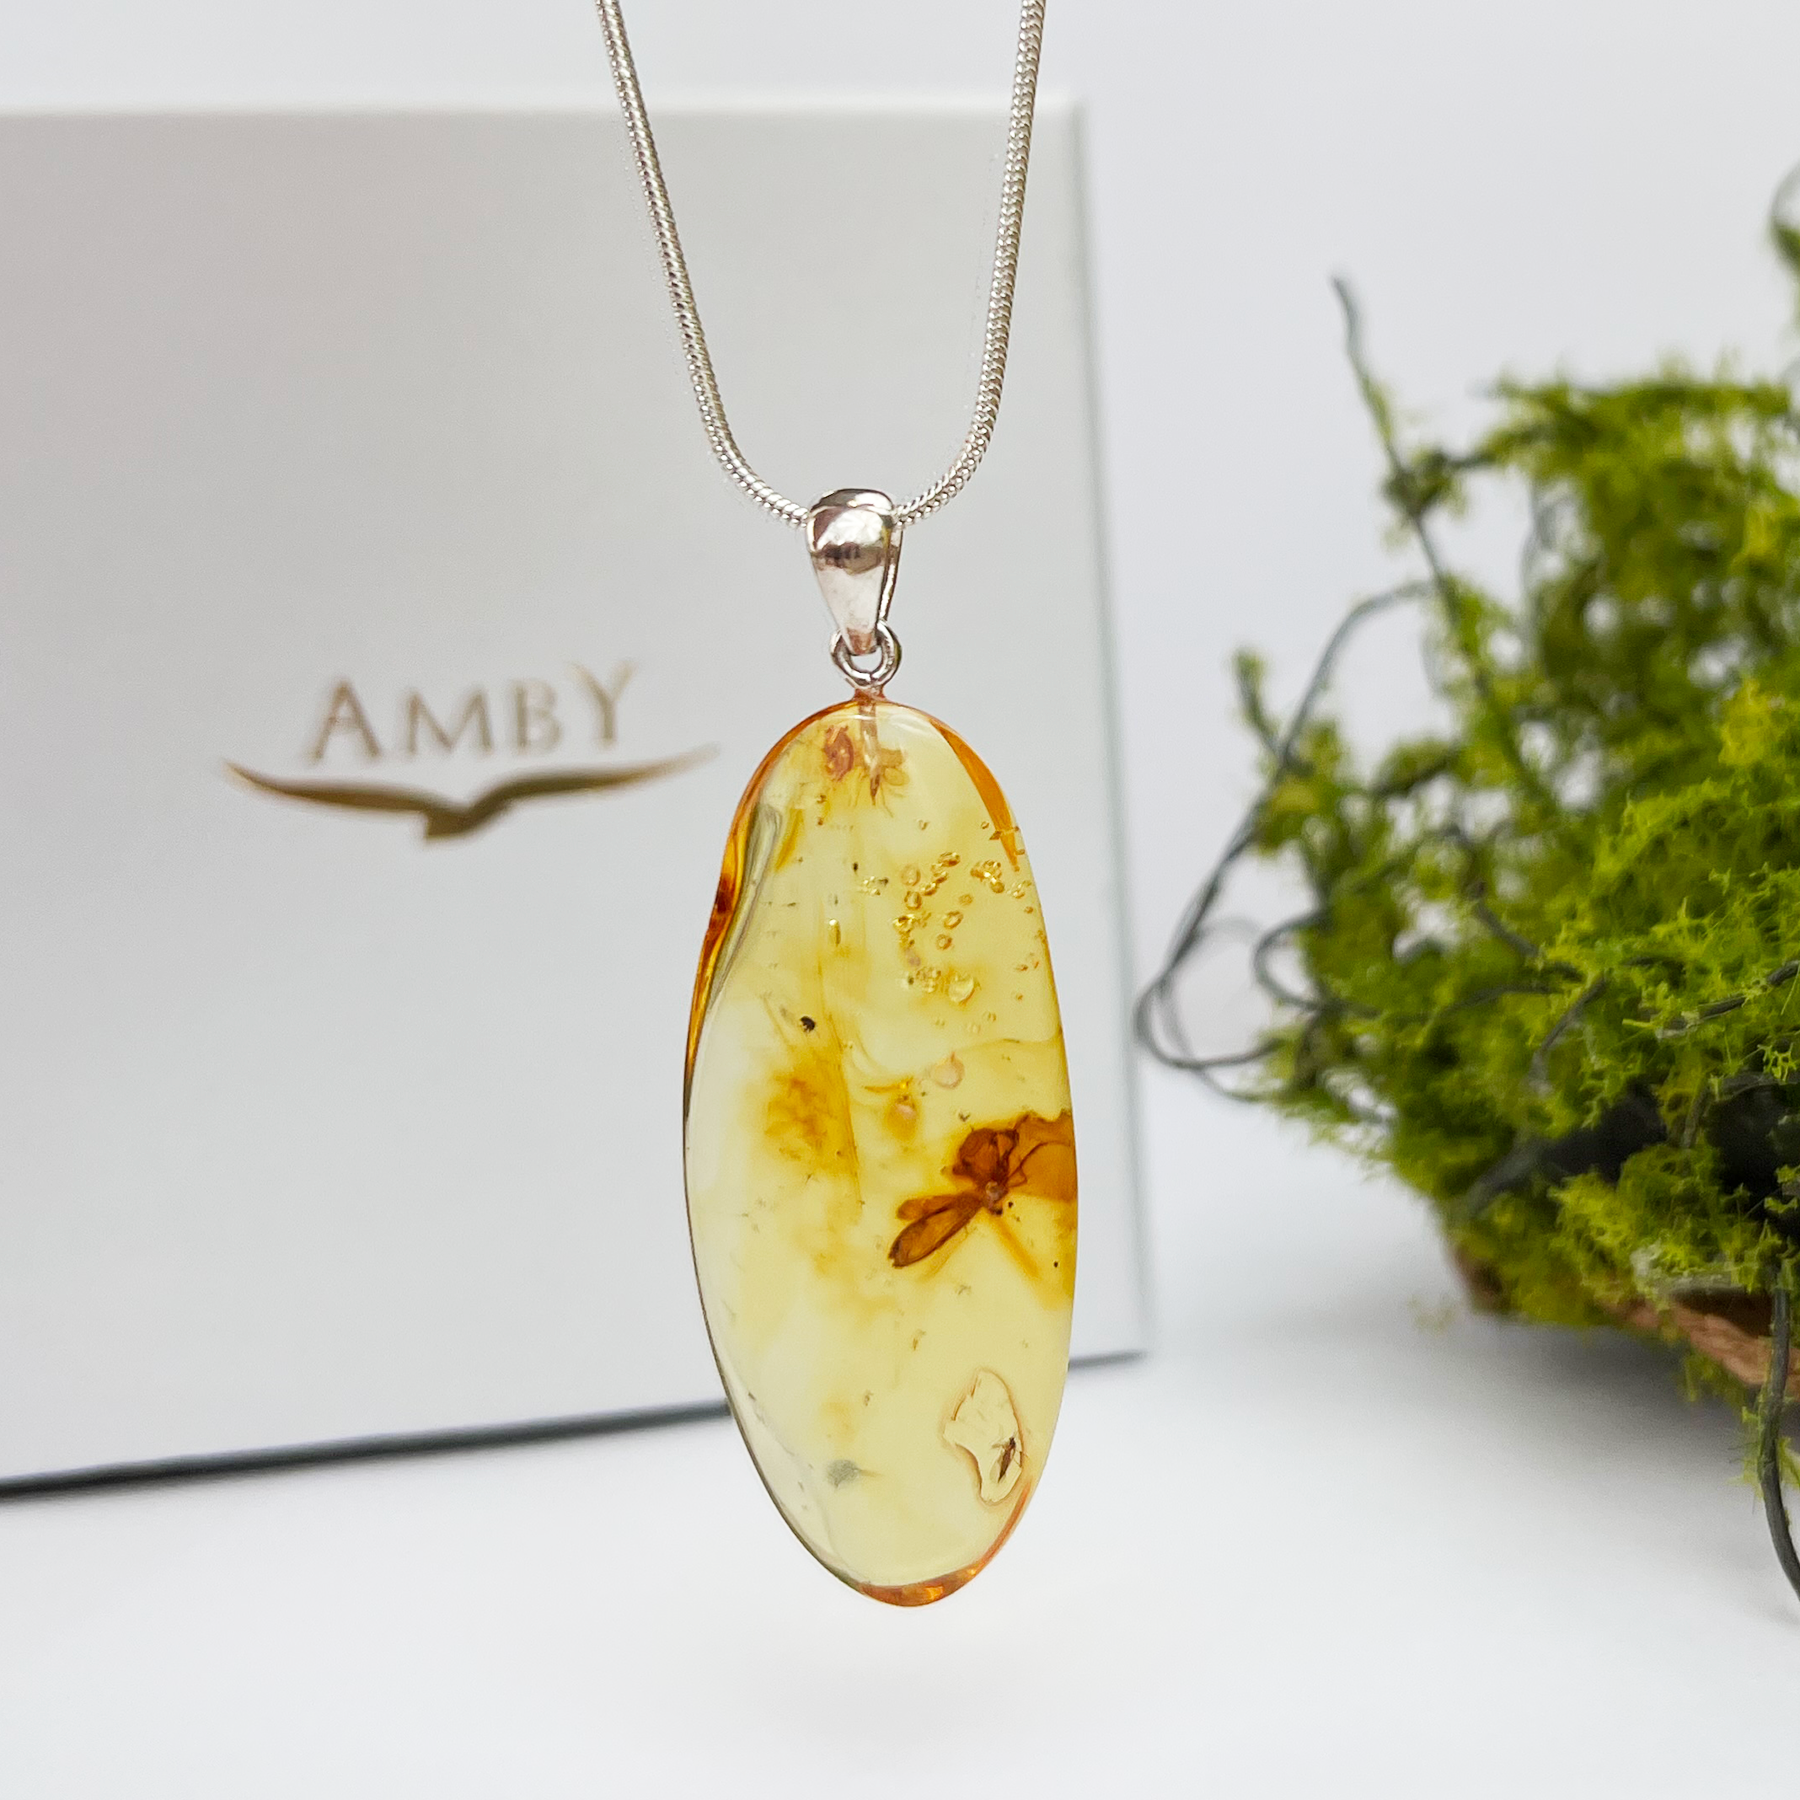 Amber pendant with inclusions "Friendship of spider and fly"